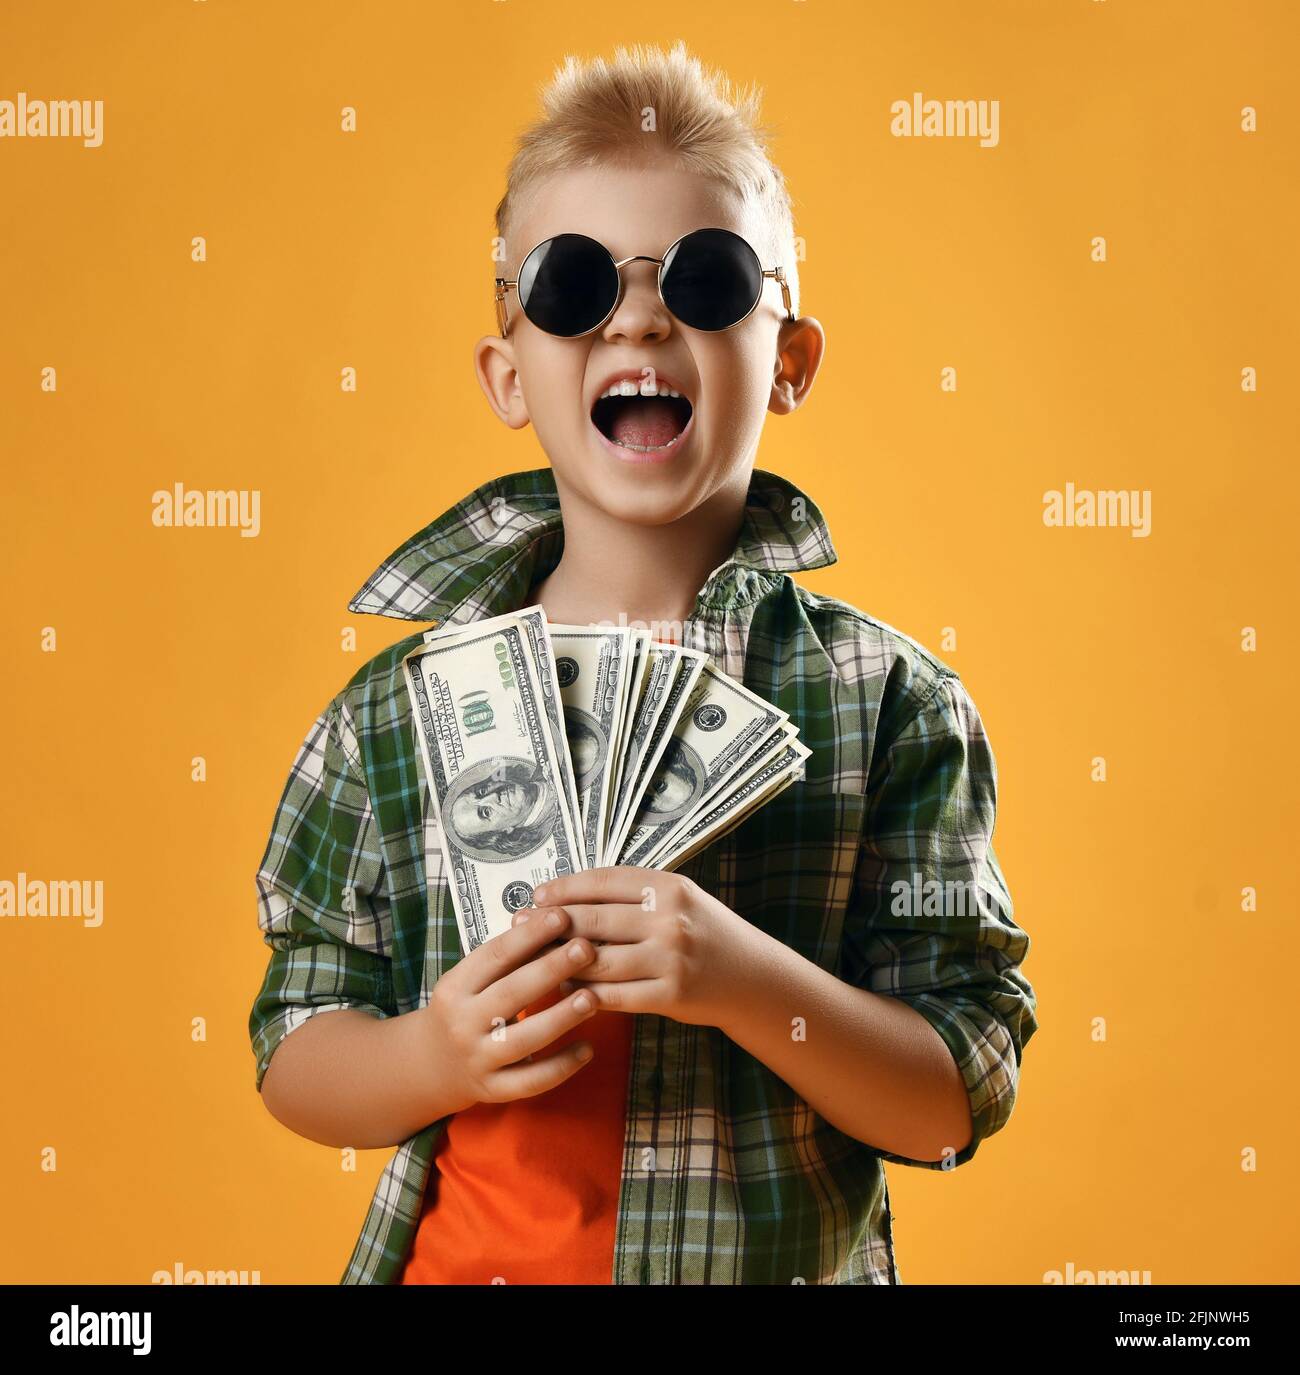 Blond smiling boy child in checkered shirt and sunglasses standing holding heap of money cash in hands feeling happy Stock Photo